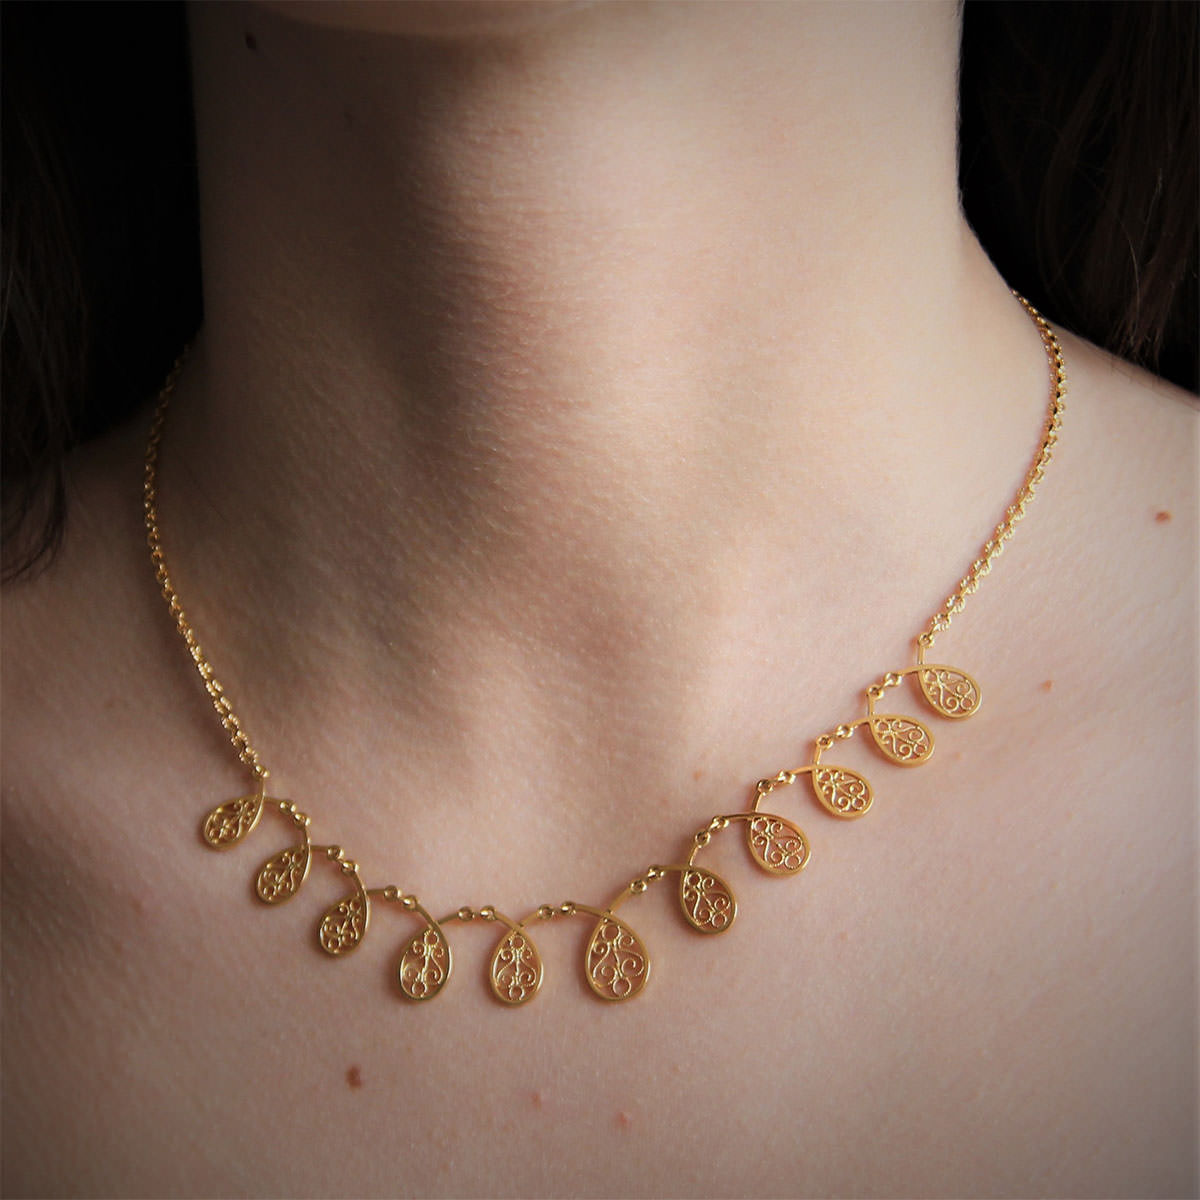 Collier Or 18k, 750 Maille Fantaisie -10.8grs -42cm